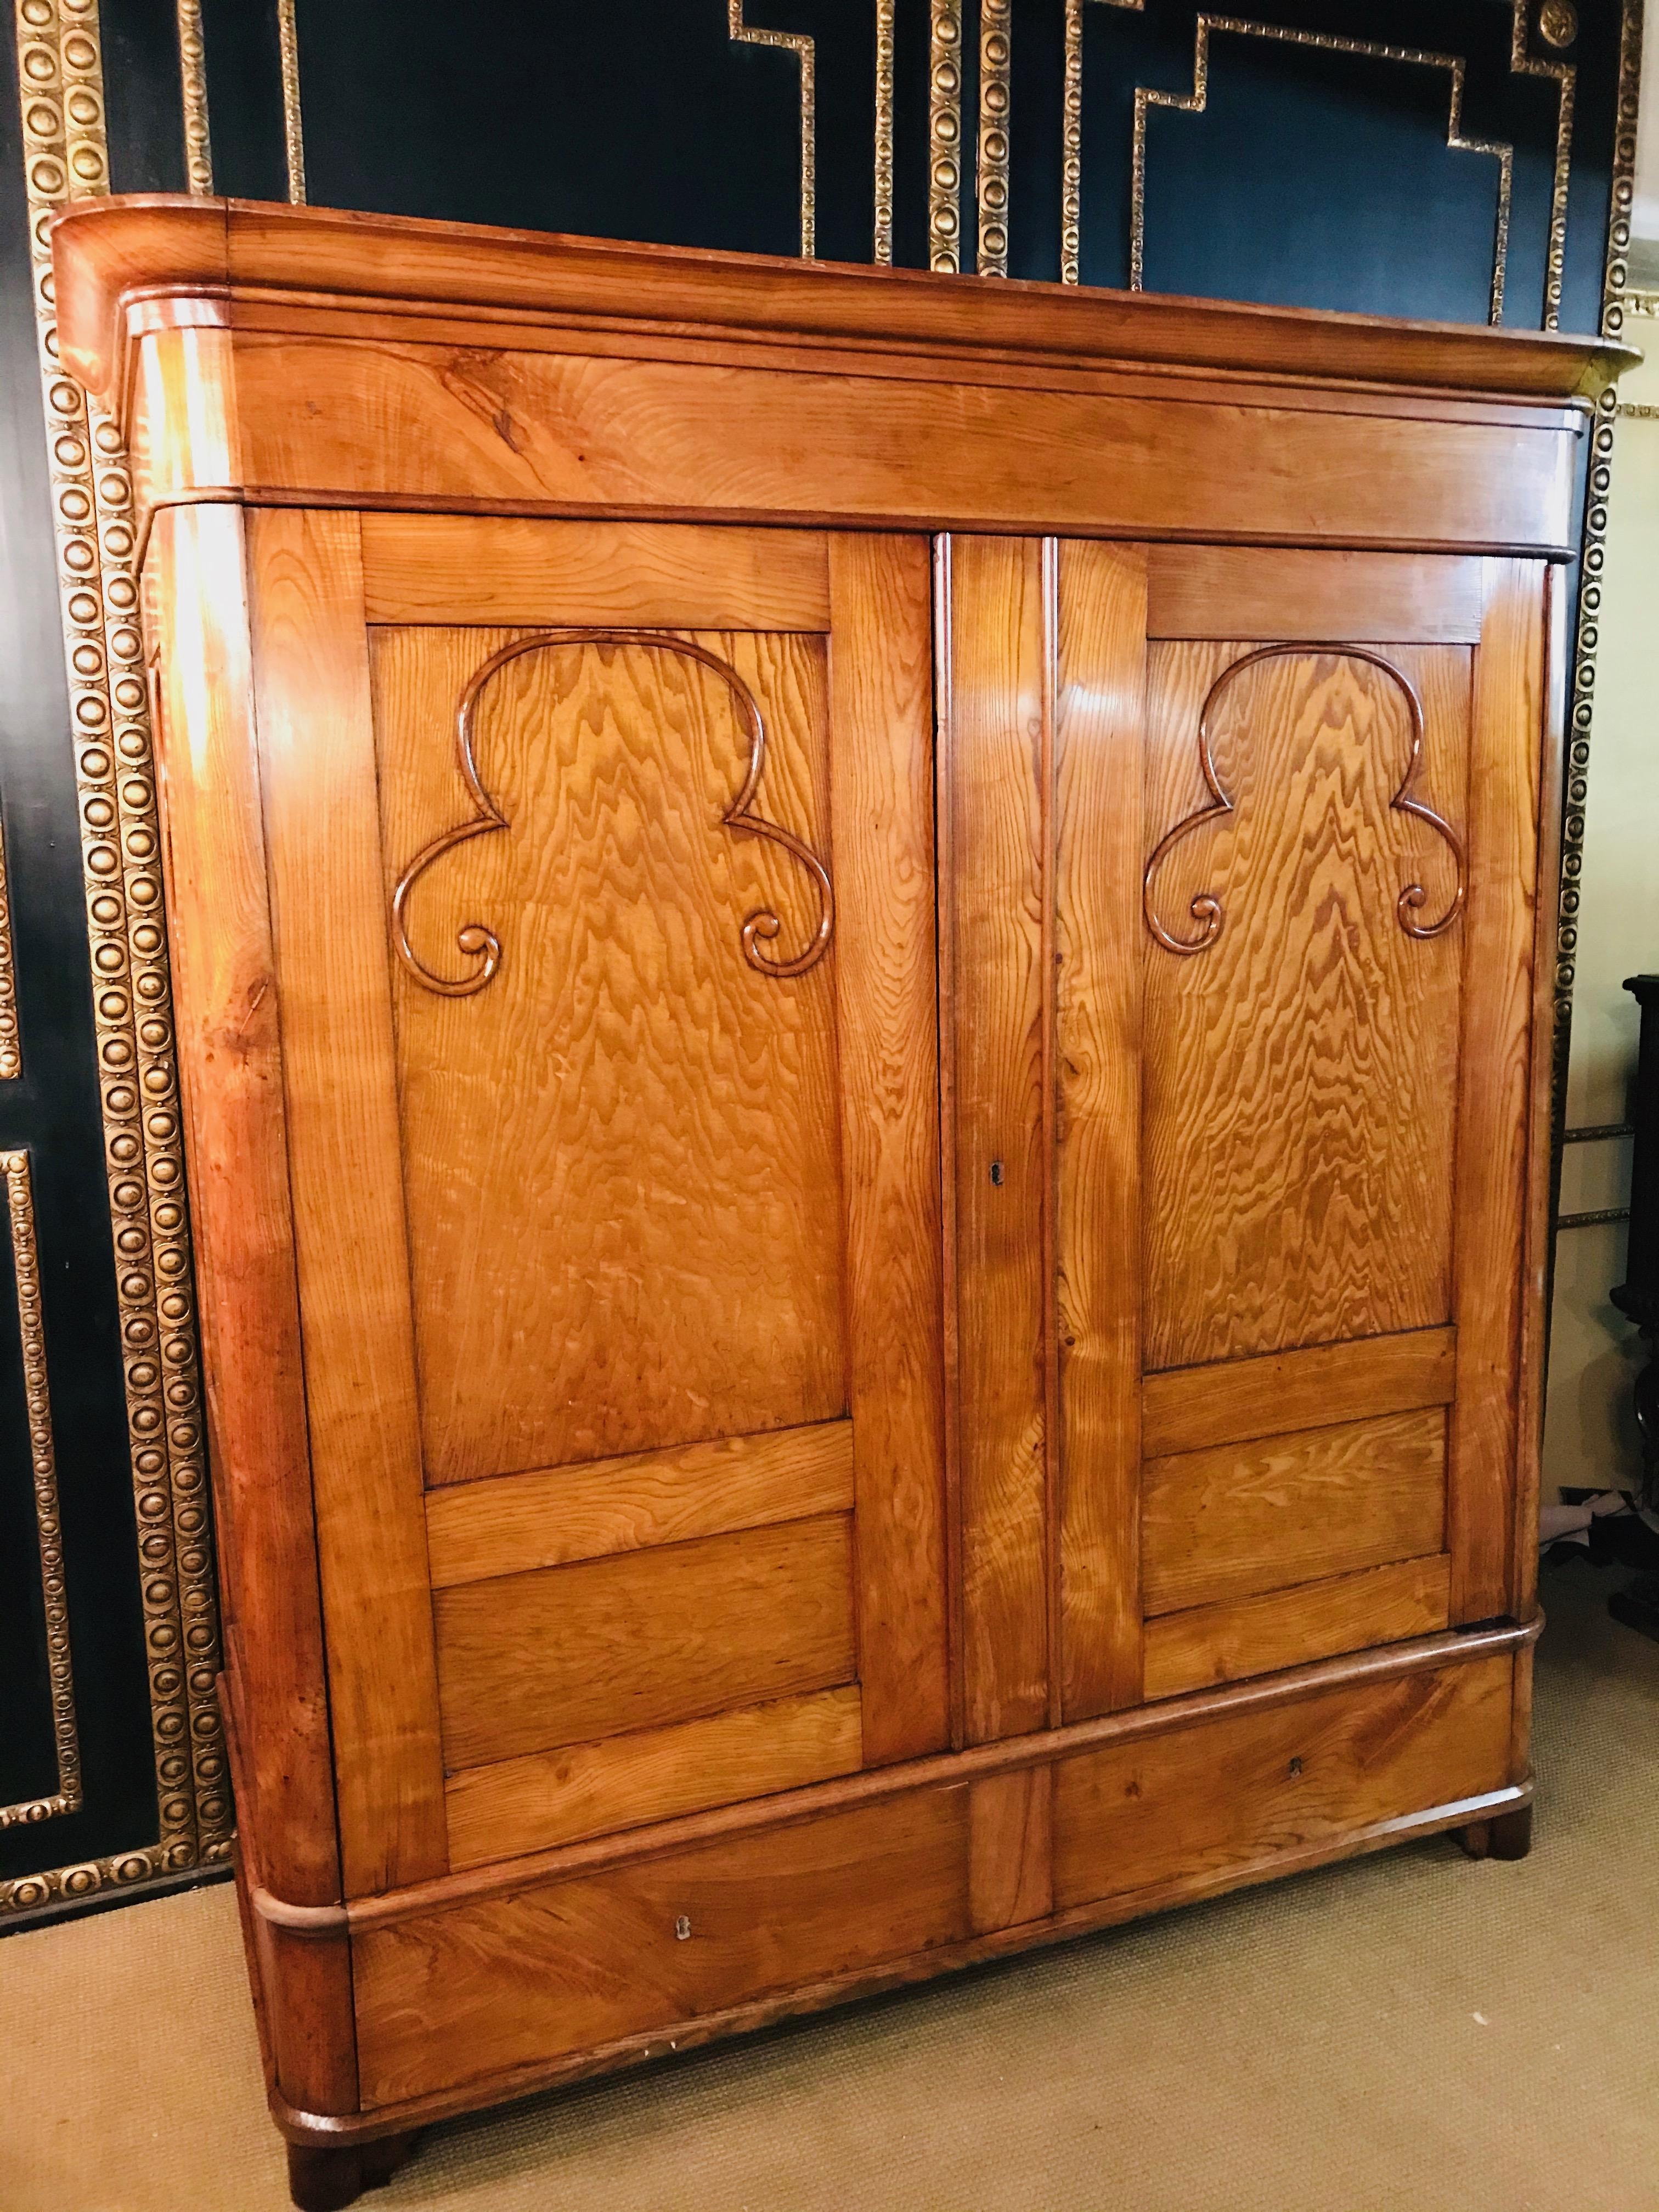 Original Biedermeier hallway cabinet wardrobe circa 1830 ash.
The unique Wardrobe or hallway cabinet is ash.
Large wing doors with beautiful and elaborate carvings and the side panels are also with carved.
2 large drawers below.
The cabinet can